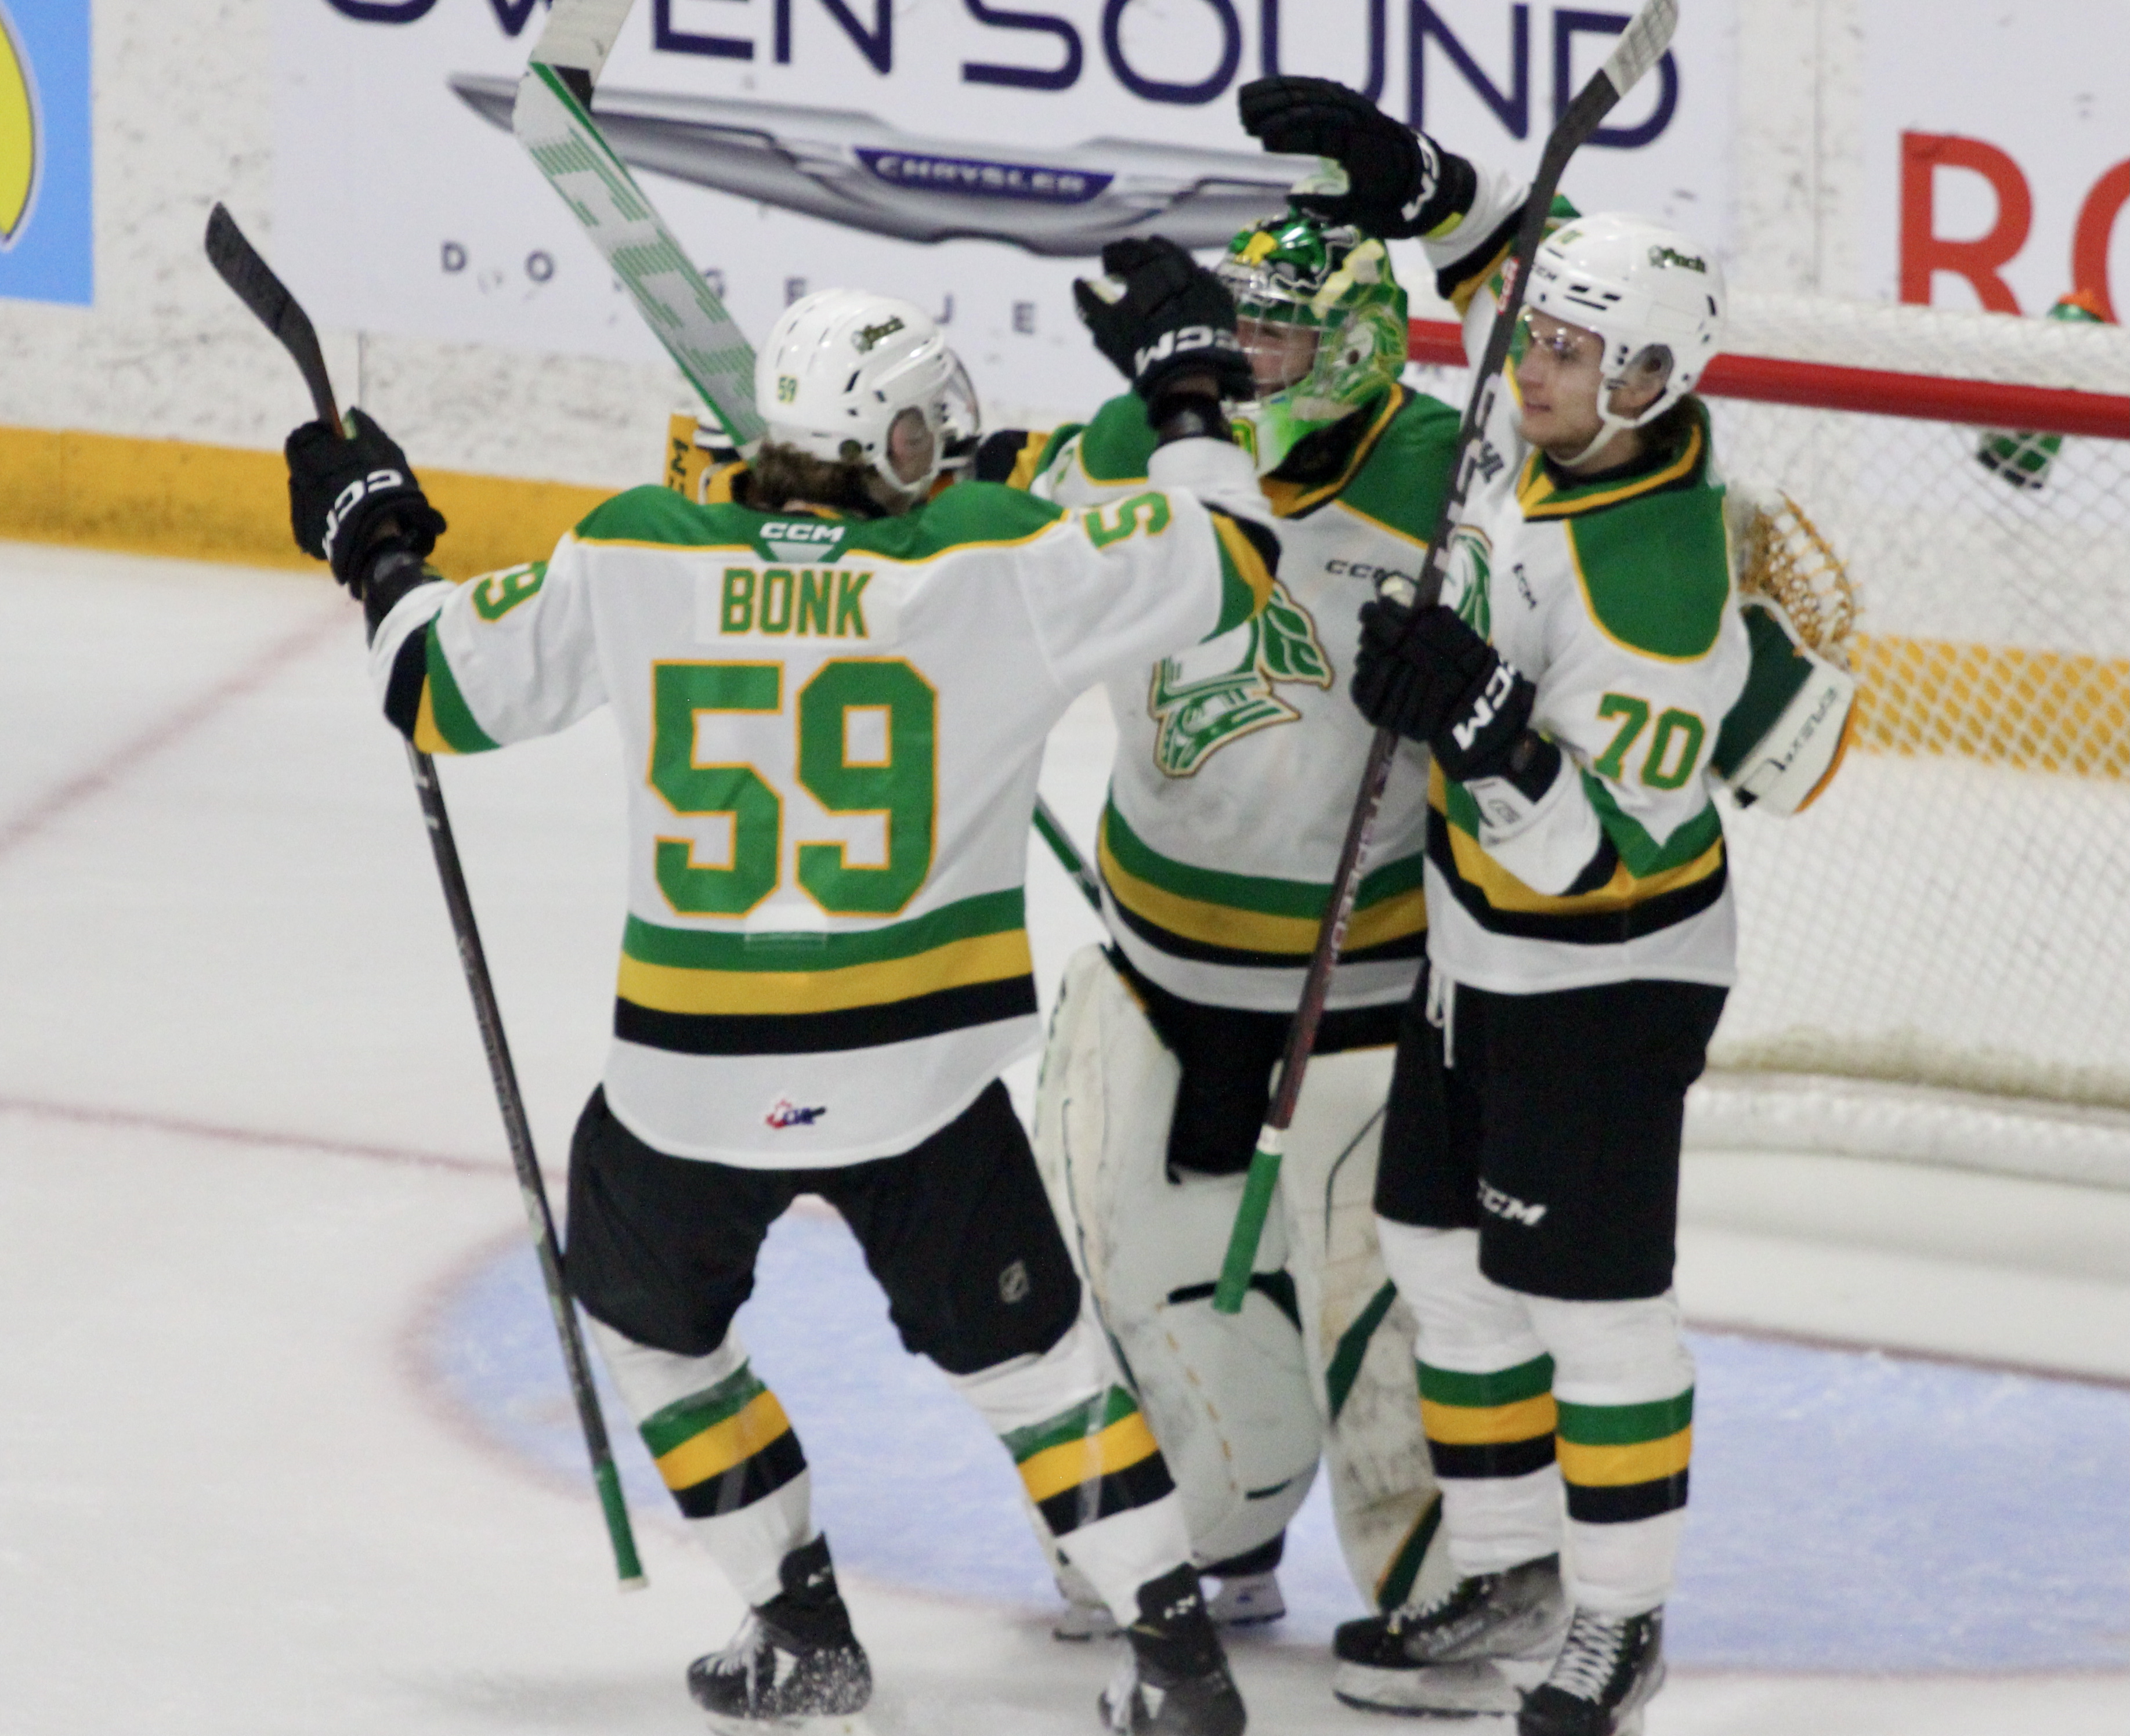 London Knights sweep Owen Sound with second shutout of opening round series